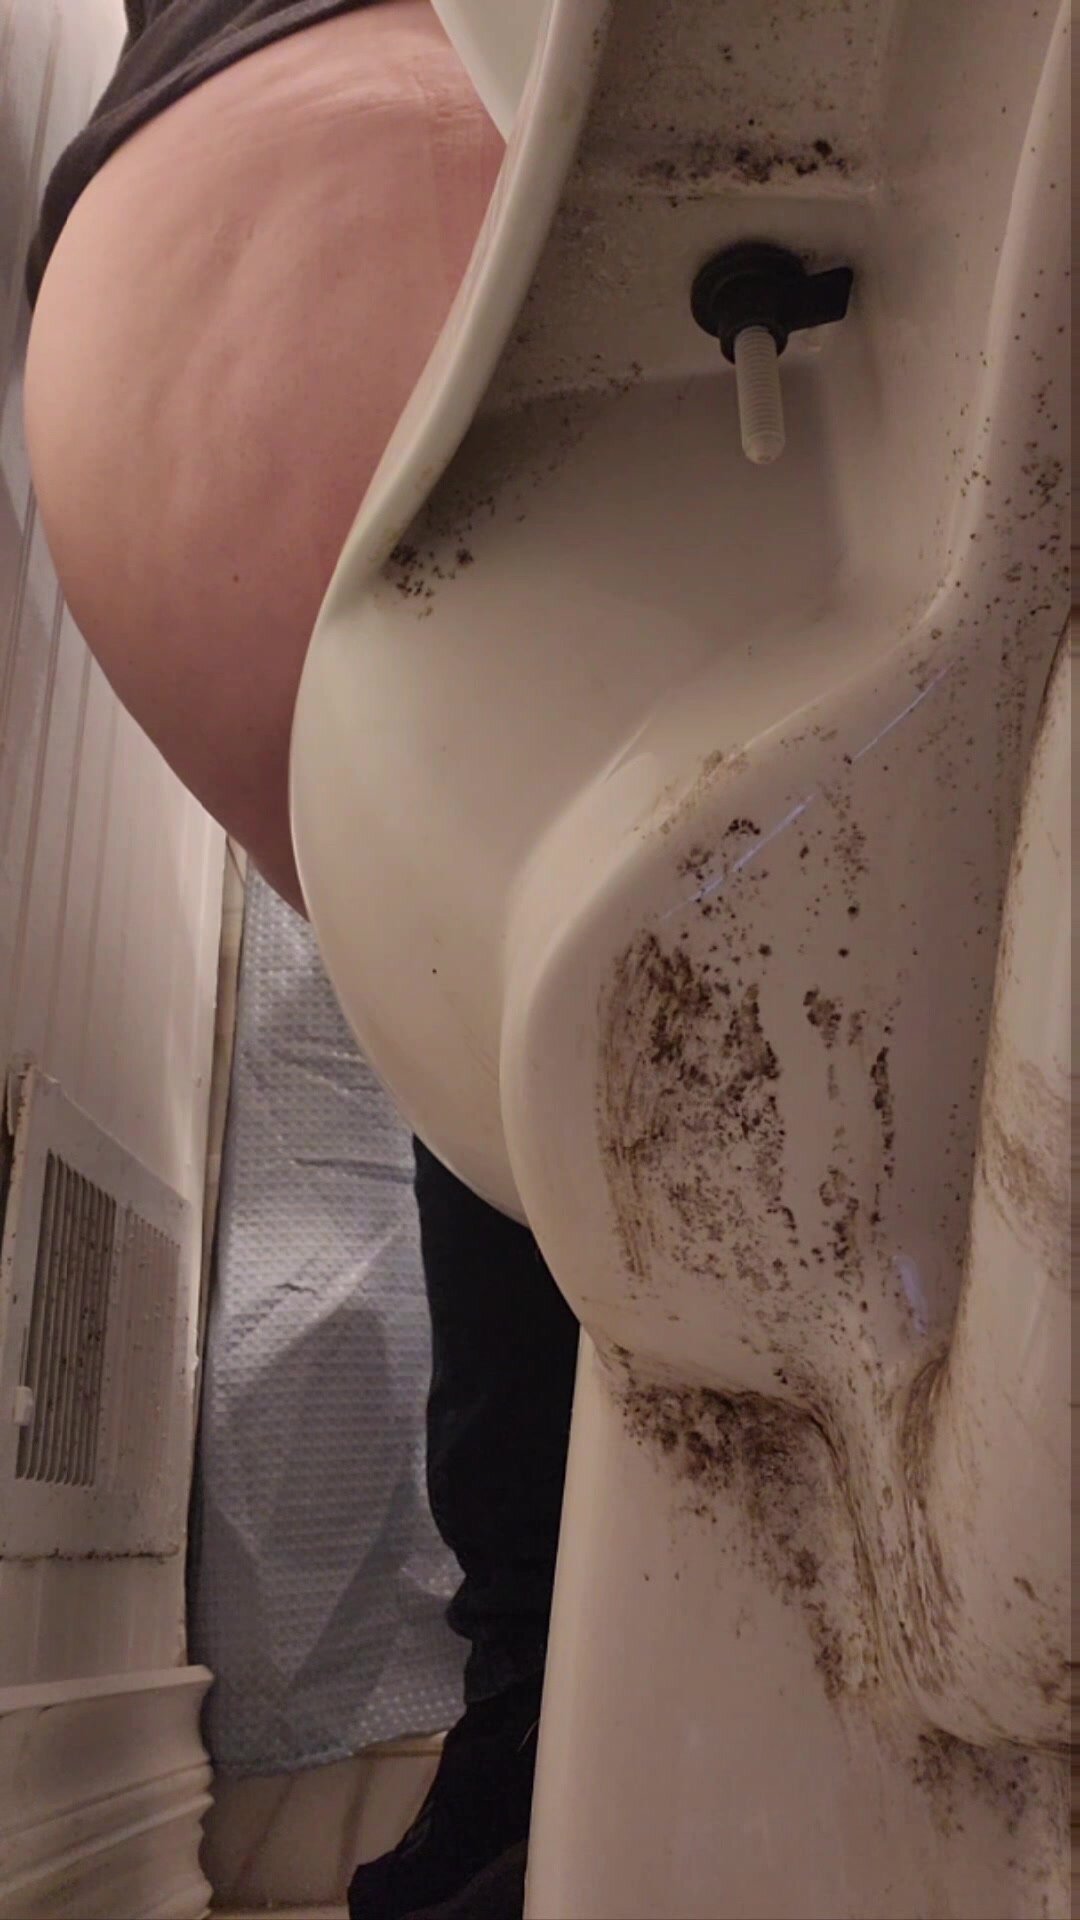 Girl pees and farts on toilet - video 3